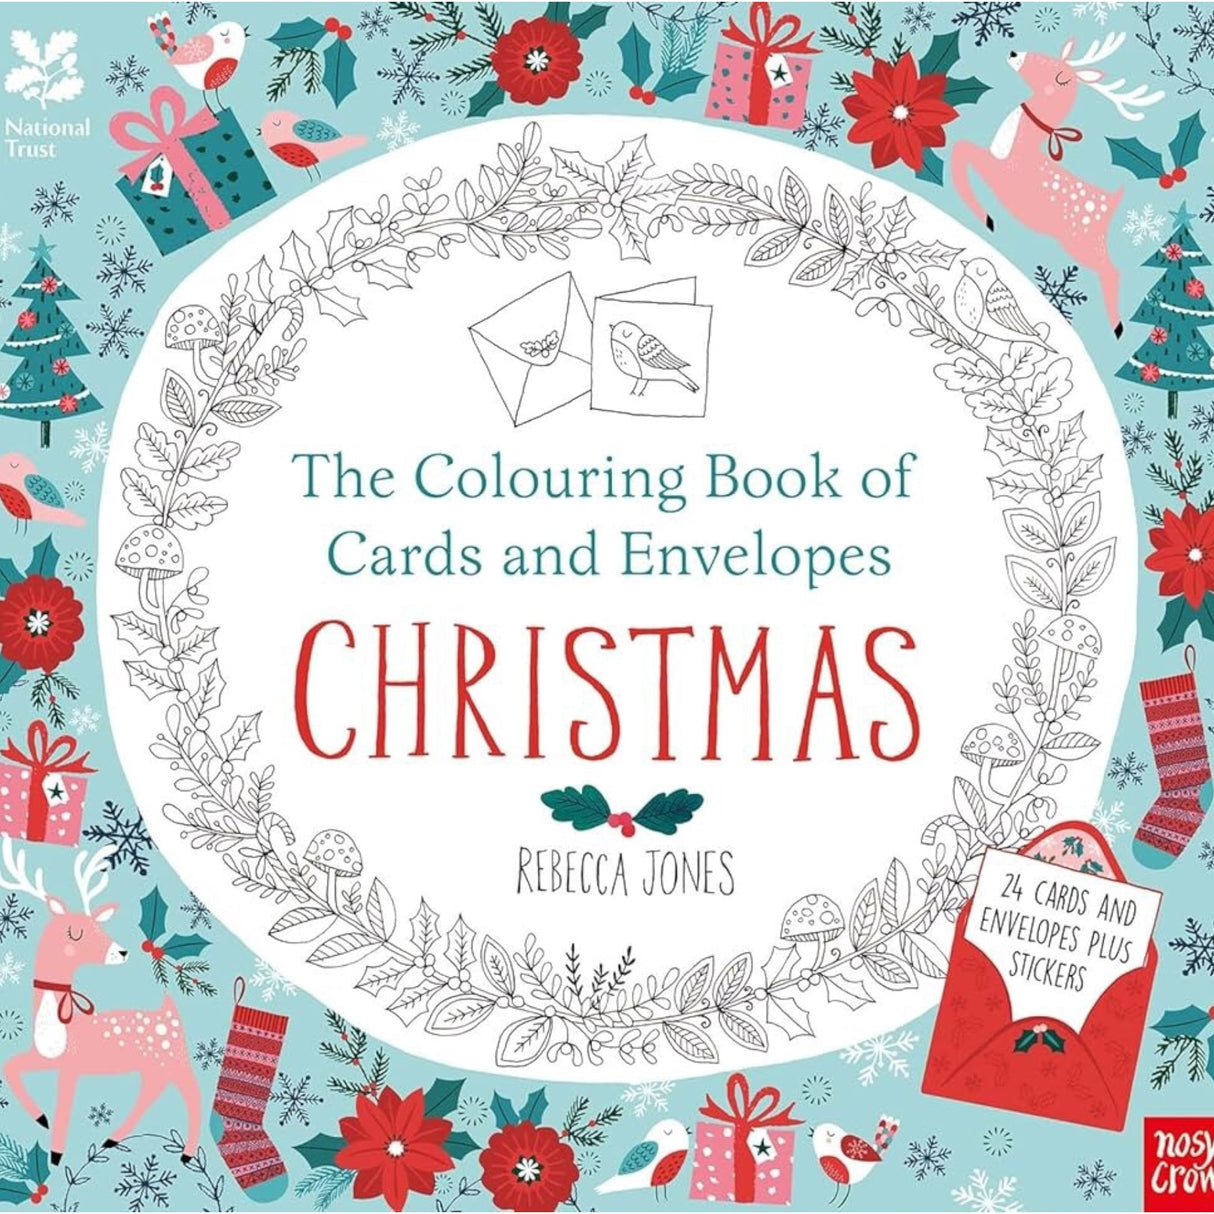 A second Chance - The coloring Book of Cards Christmas